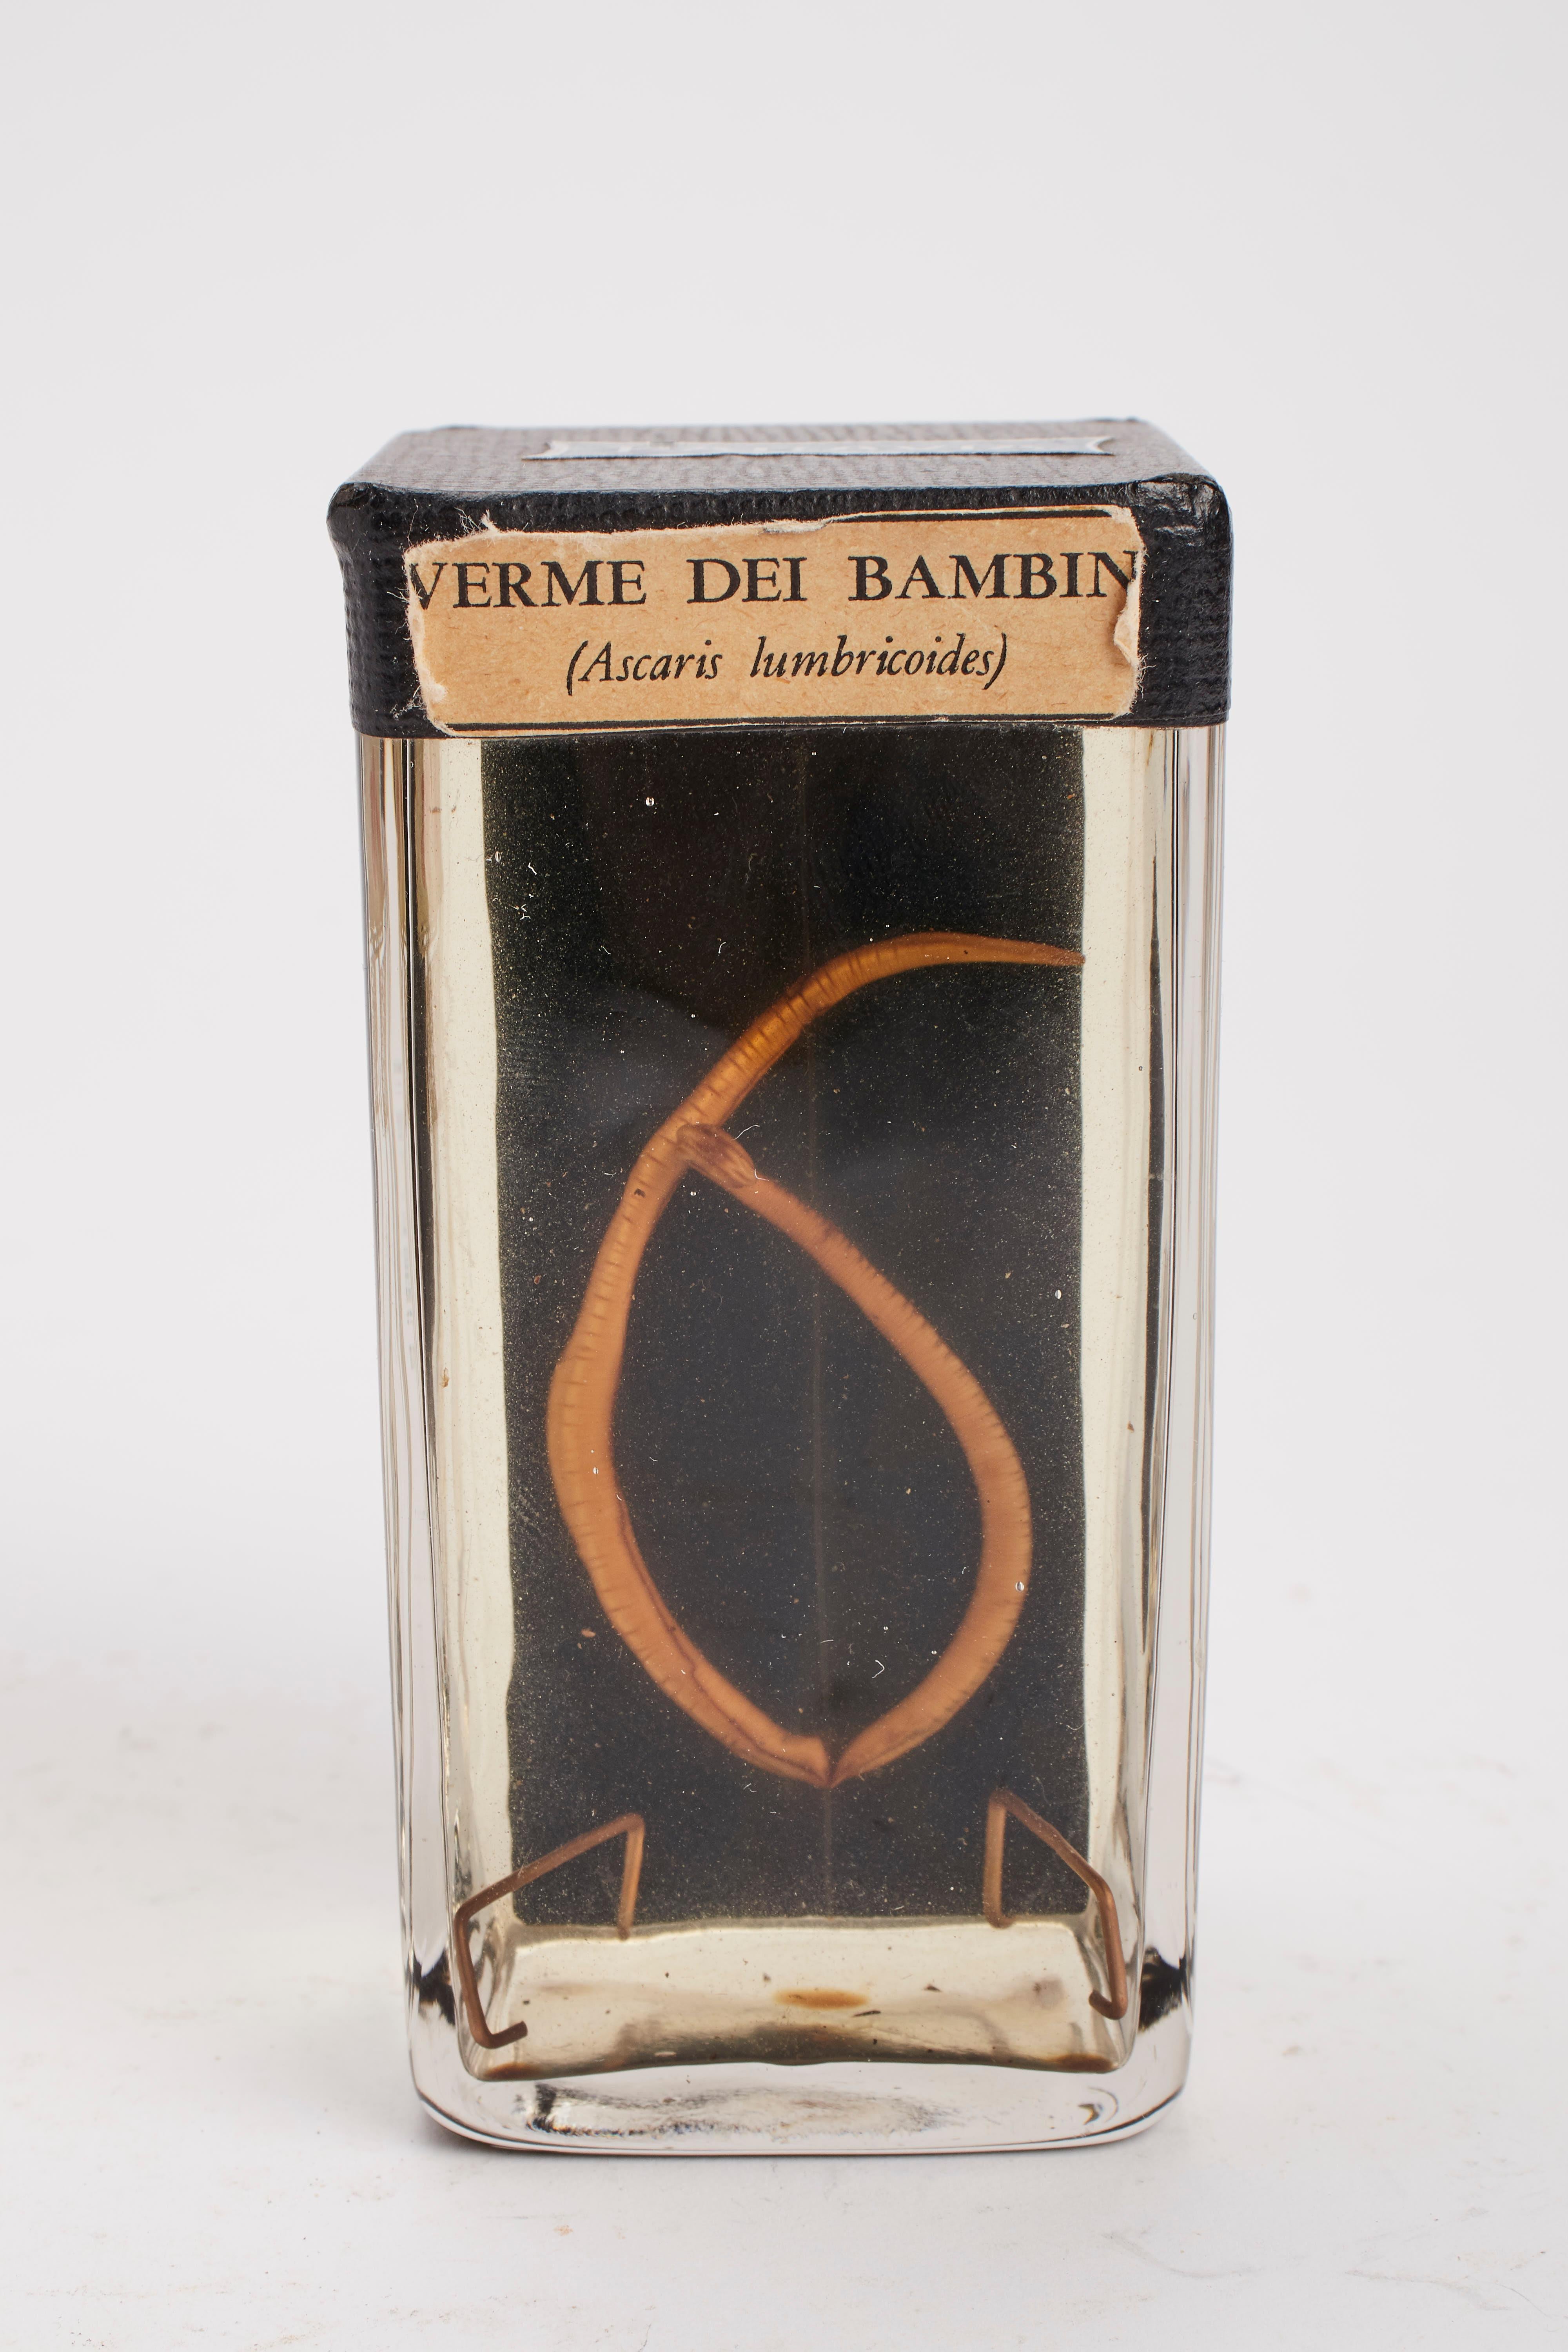 An example of natural specimen of Ascaris Lumbricoides. Children verme, preserved in formaldehyde and sealed on glass container. Italy circa 1900. 